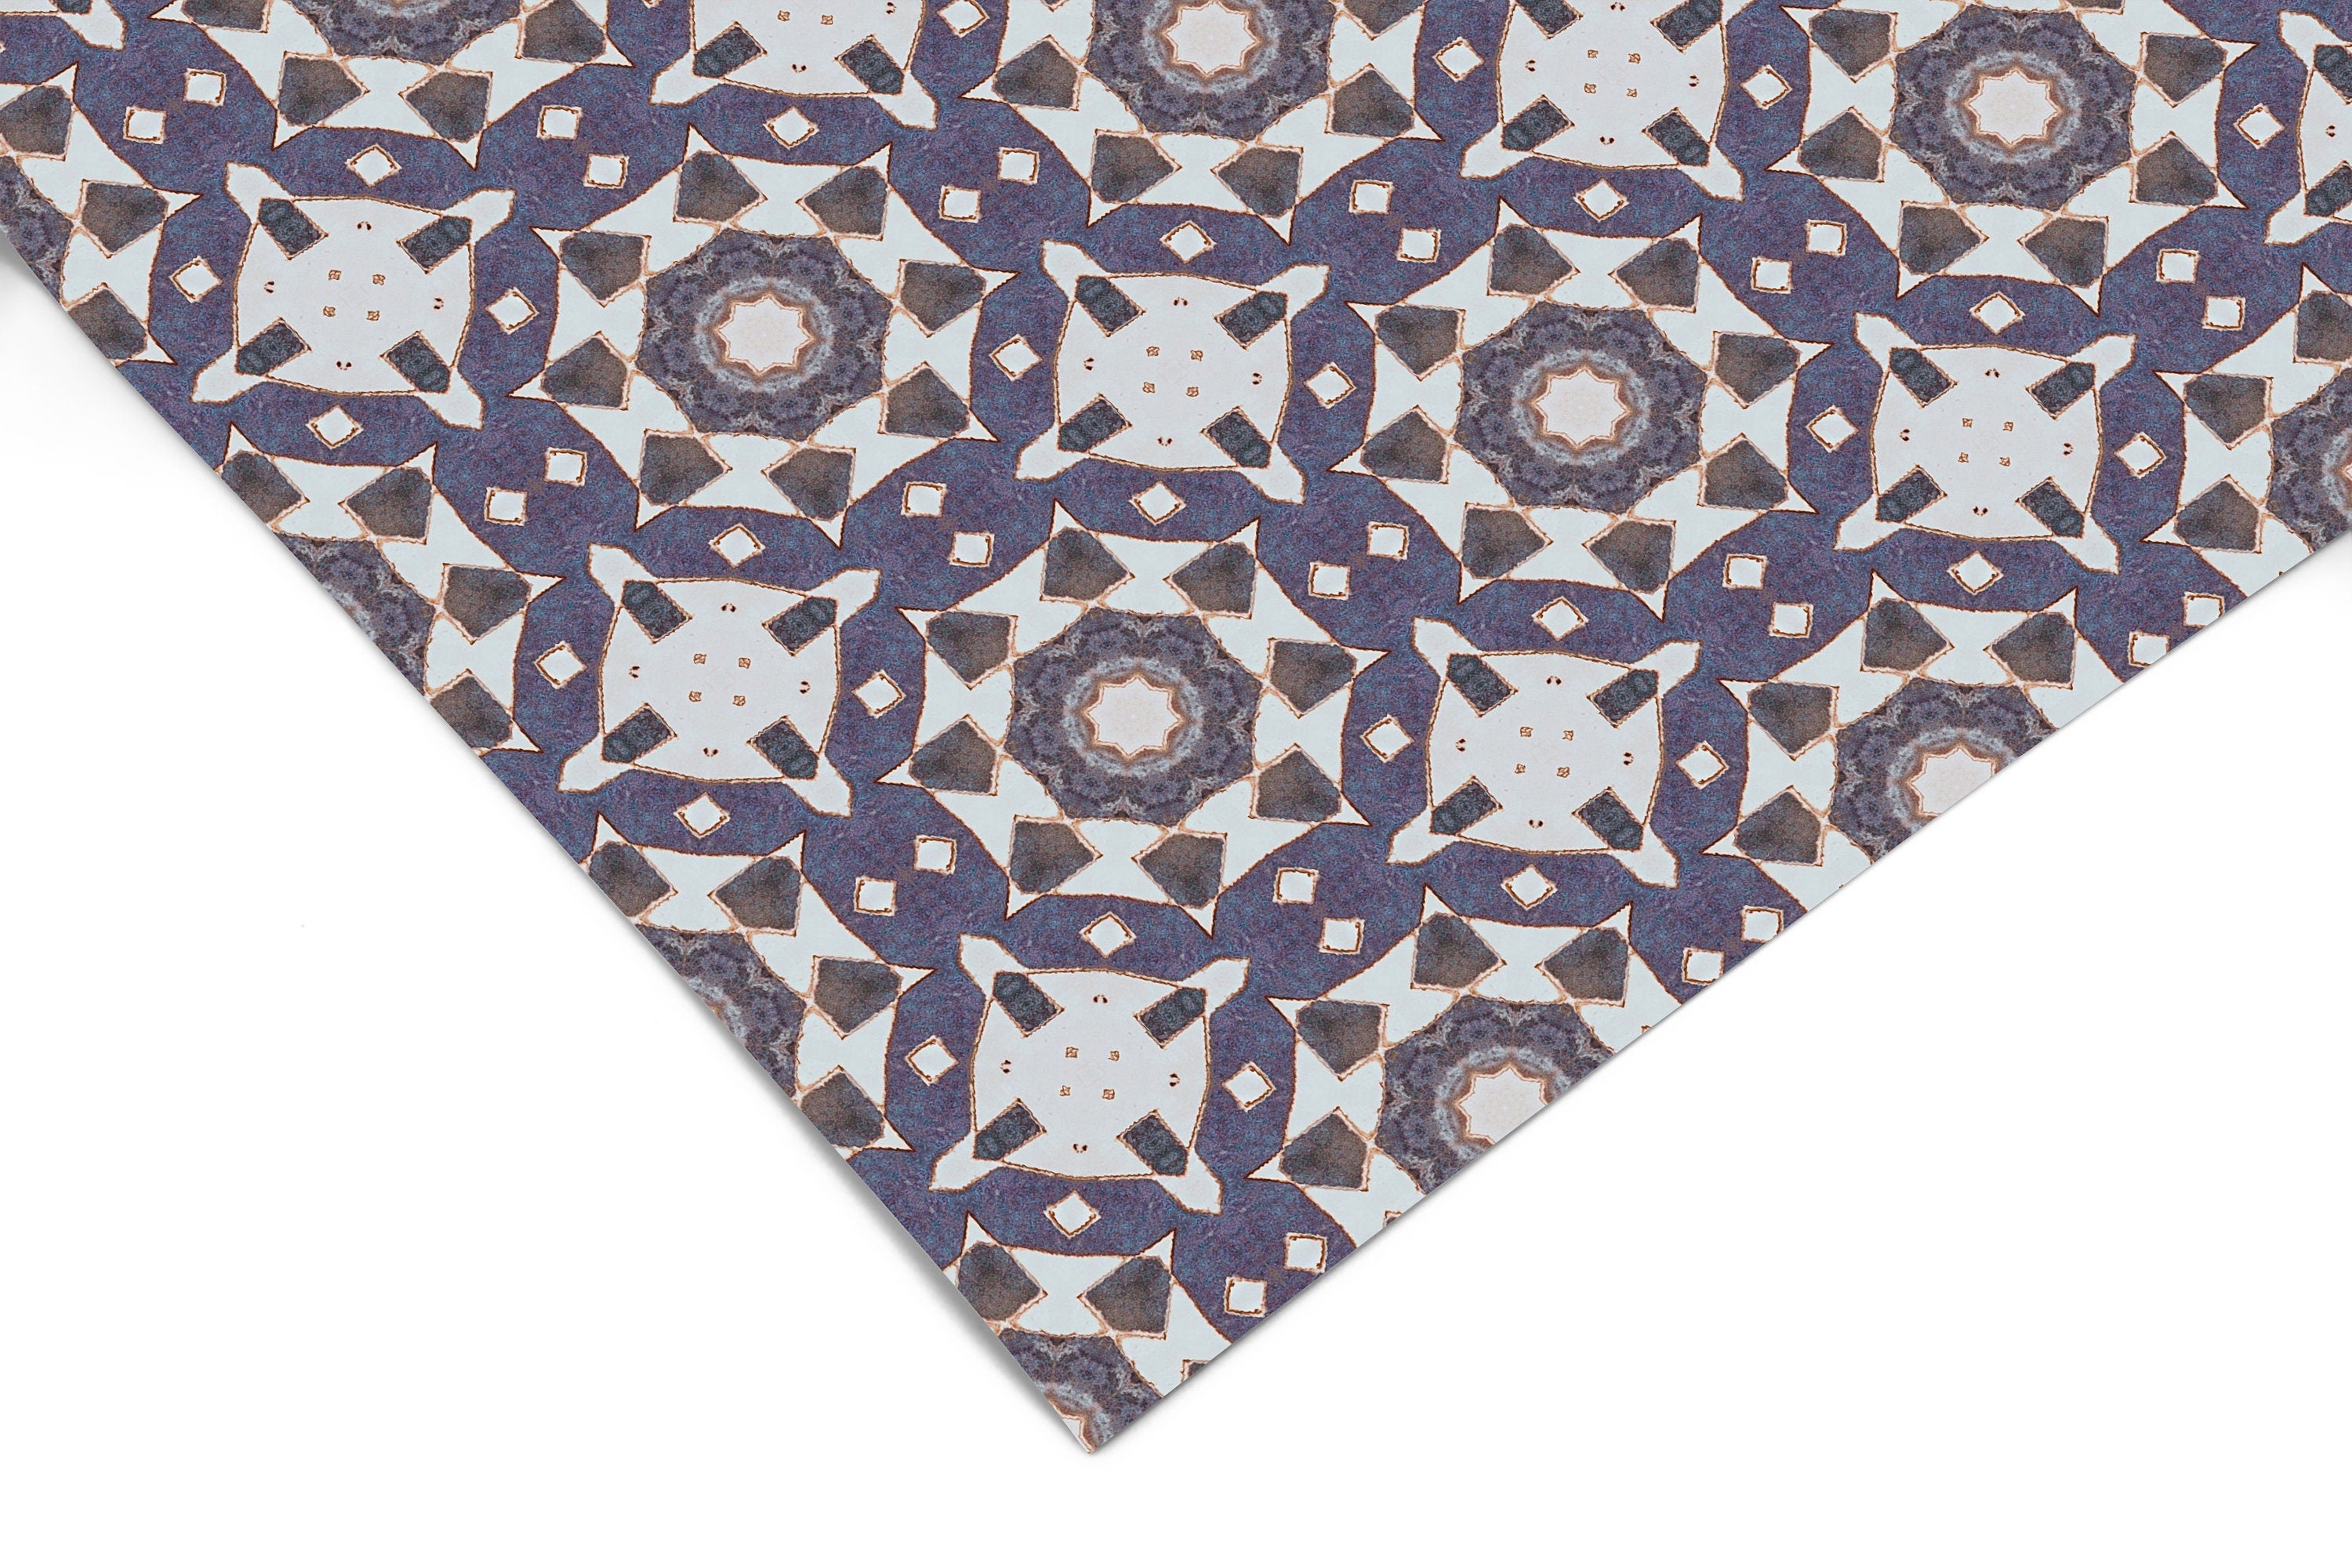 Moroccan Tile Pattern Contact Paper | Peel And Stick Wallpaper | Removable Wallpaper | Shelf Liner | Drawer Liner | Peel and Stick Paper 668 - JamesAndColors